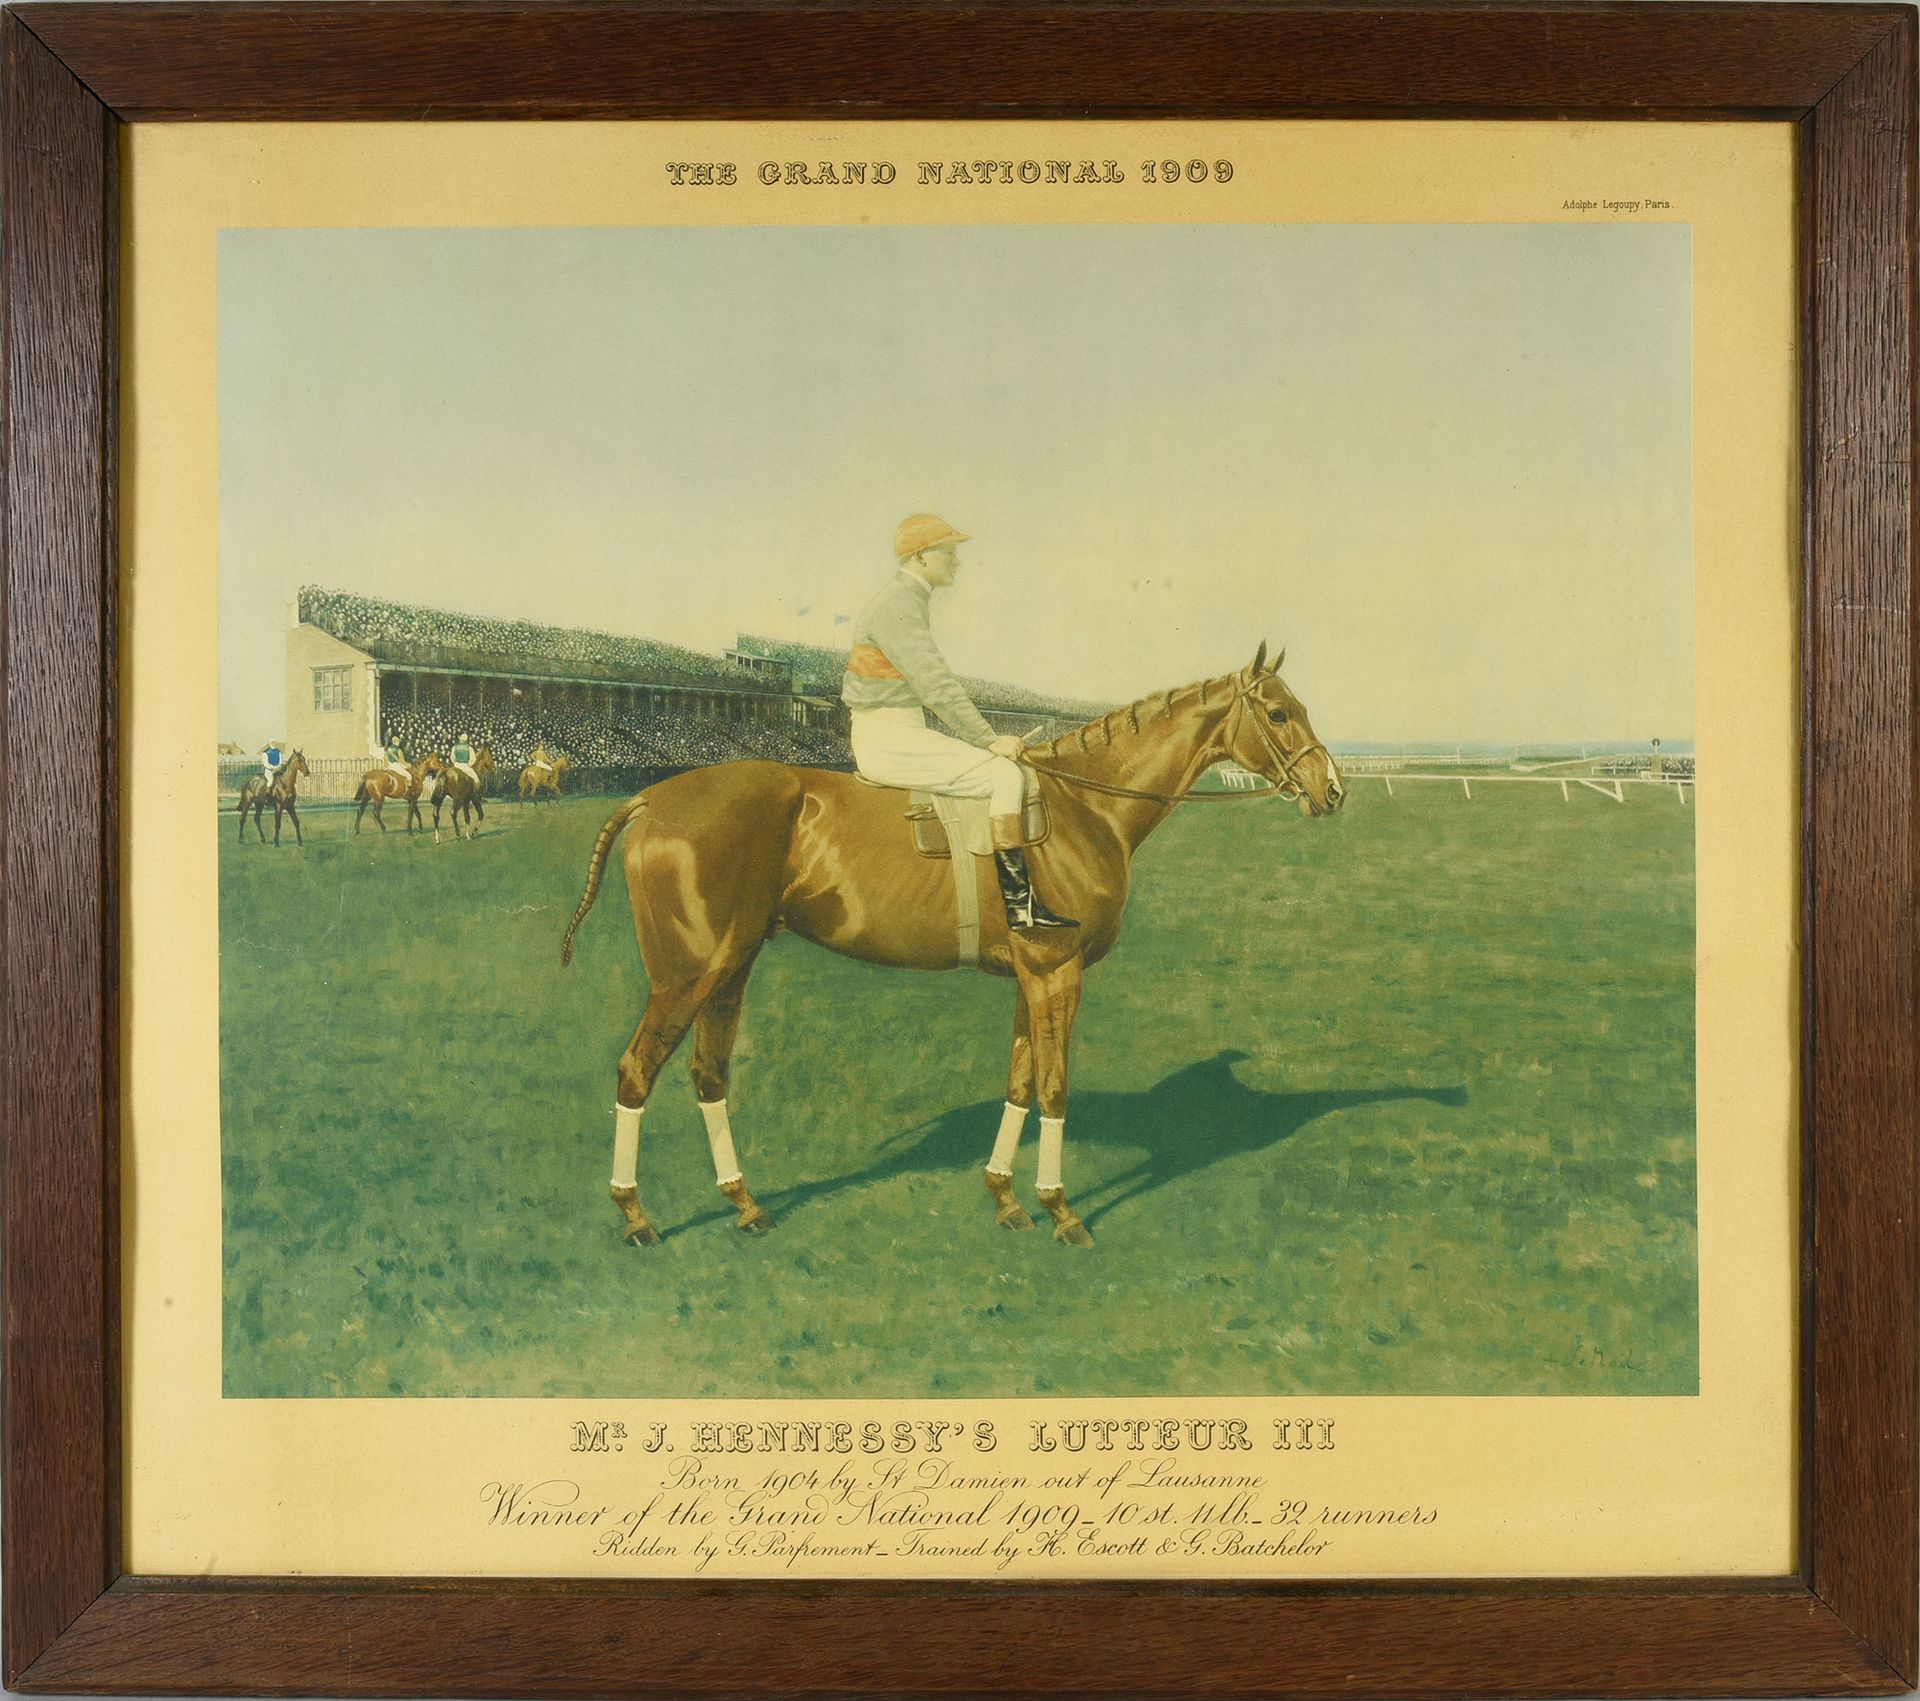 LE NAIL (XIX-XXe). Grand National 1909 : Wrestler III belonging to Mr Hennessy
L&hellip;